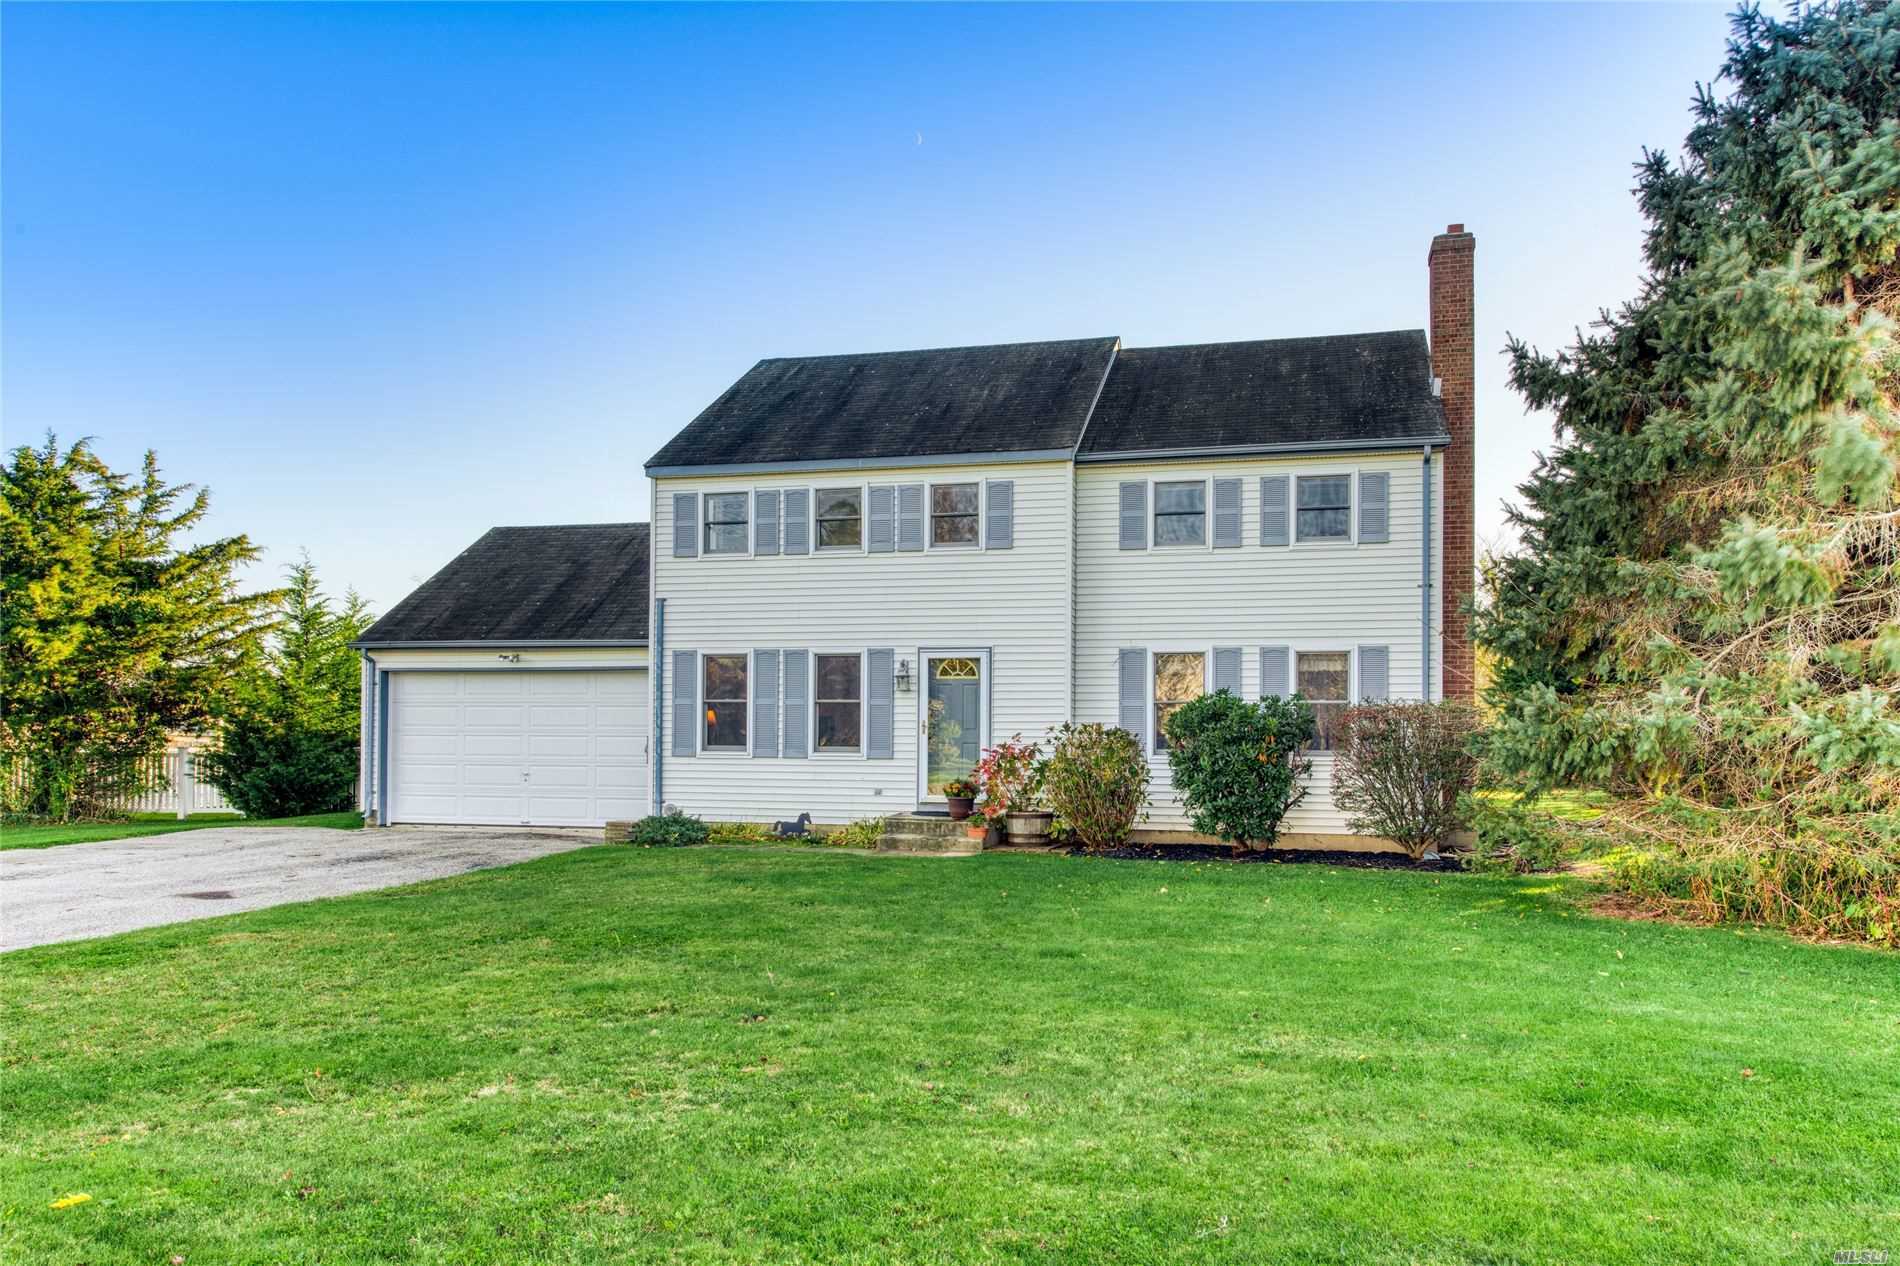 This Expansive North Fork Colonial Home Offers 4 Bedrooms and 3 Full Bathrooms. The home includes a cozy den and a large family room addition. A spacious backyard abutting 22 acres of preserved land awaits. Sleeping arrangements are ample.